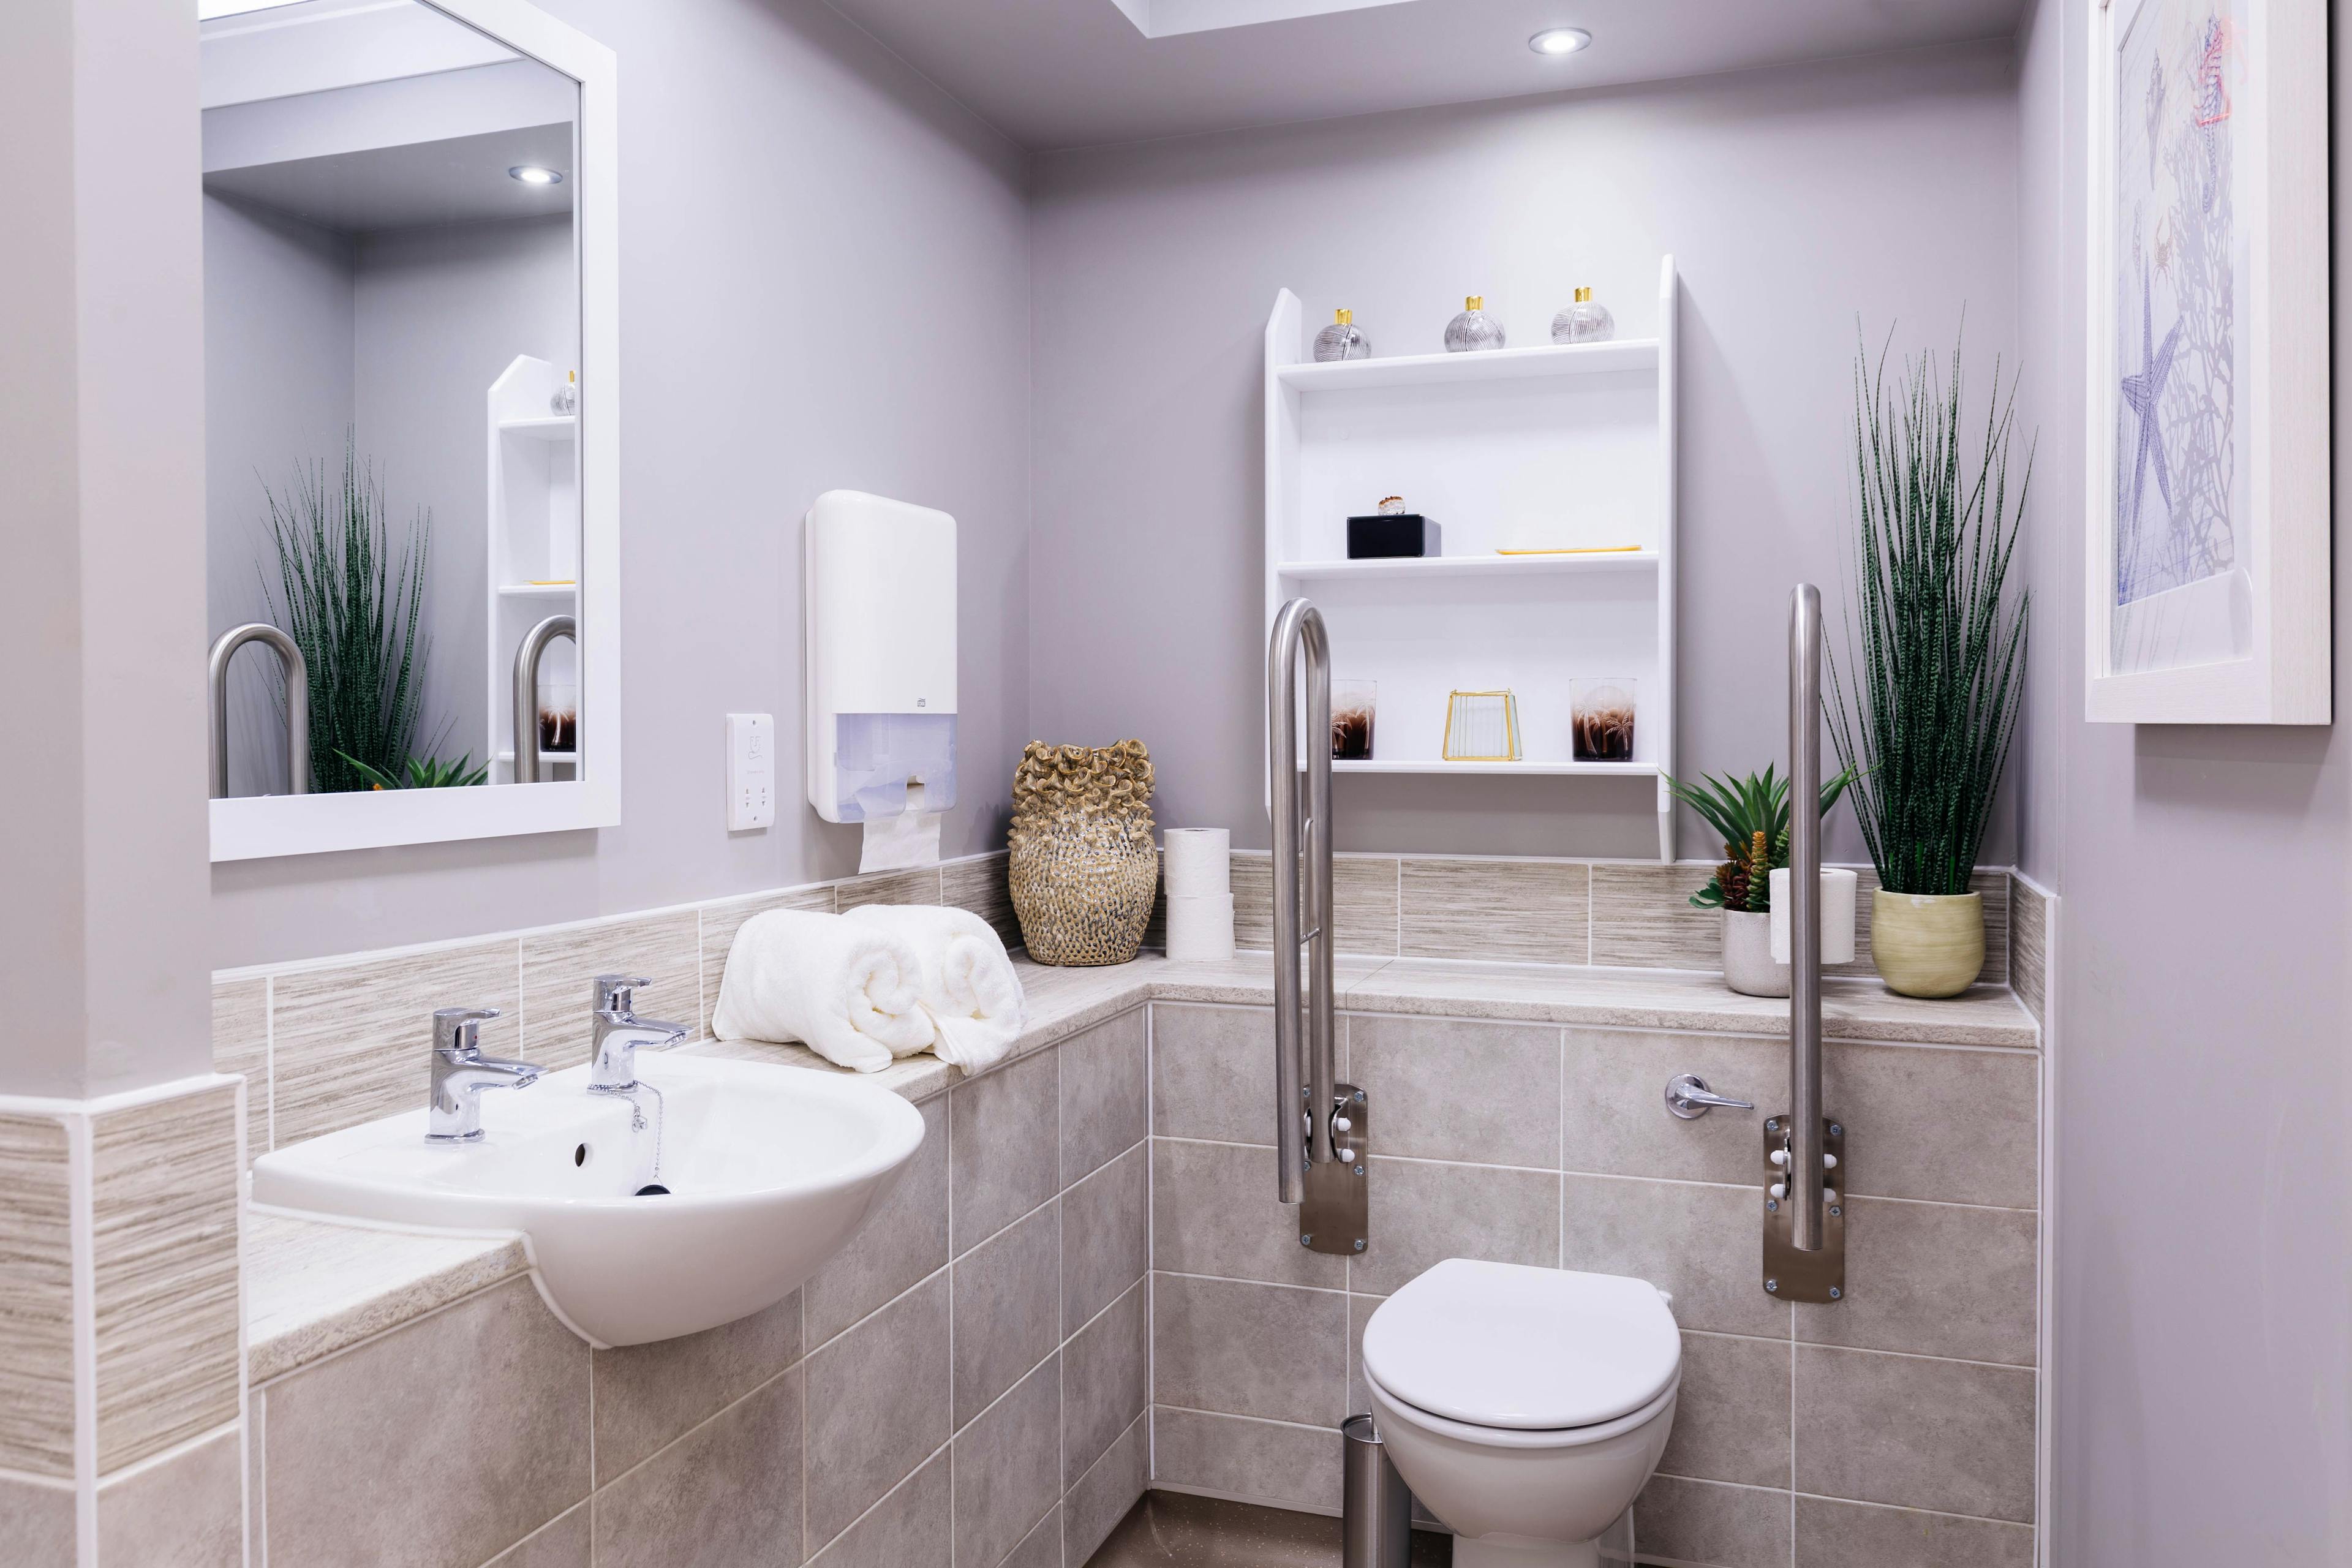 Bathroom of Upton Bay Care Home in Poole, Dorset